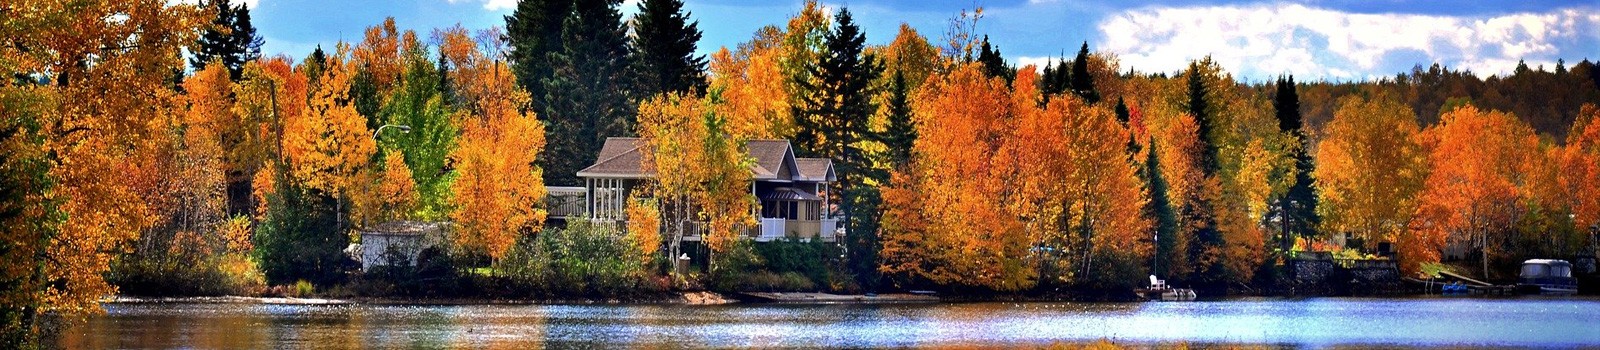 Canadian lake house in the Fall